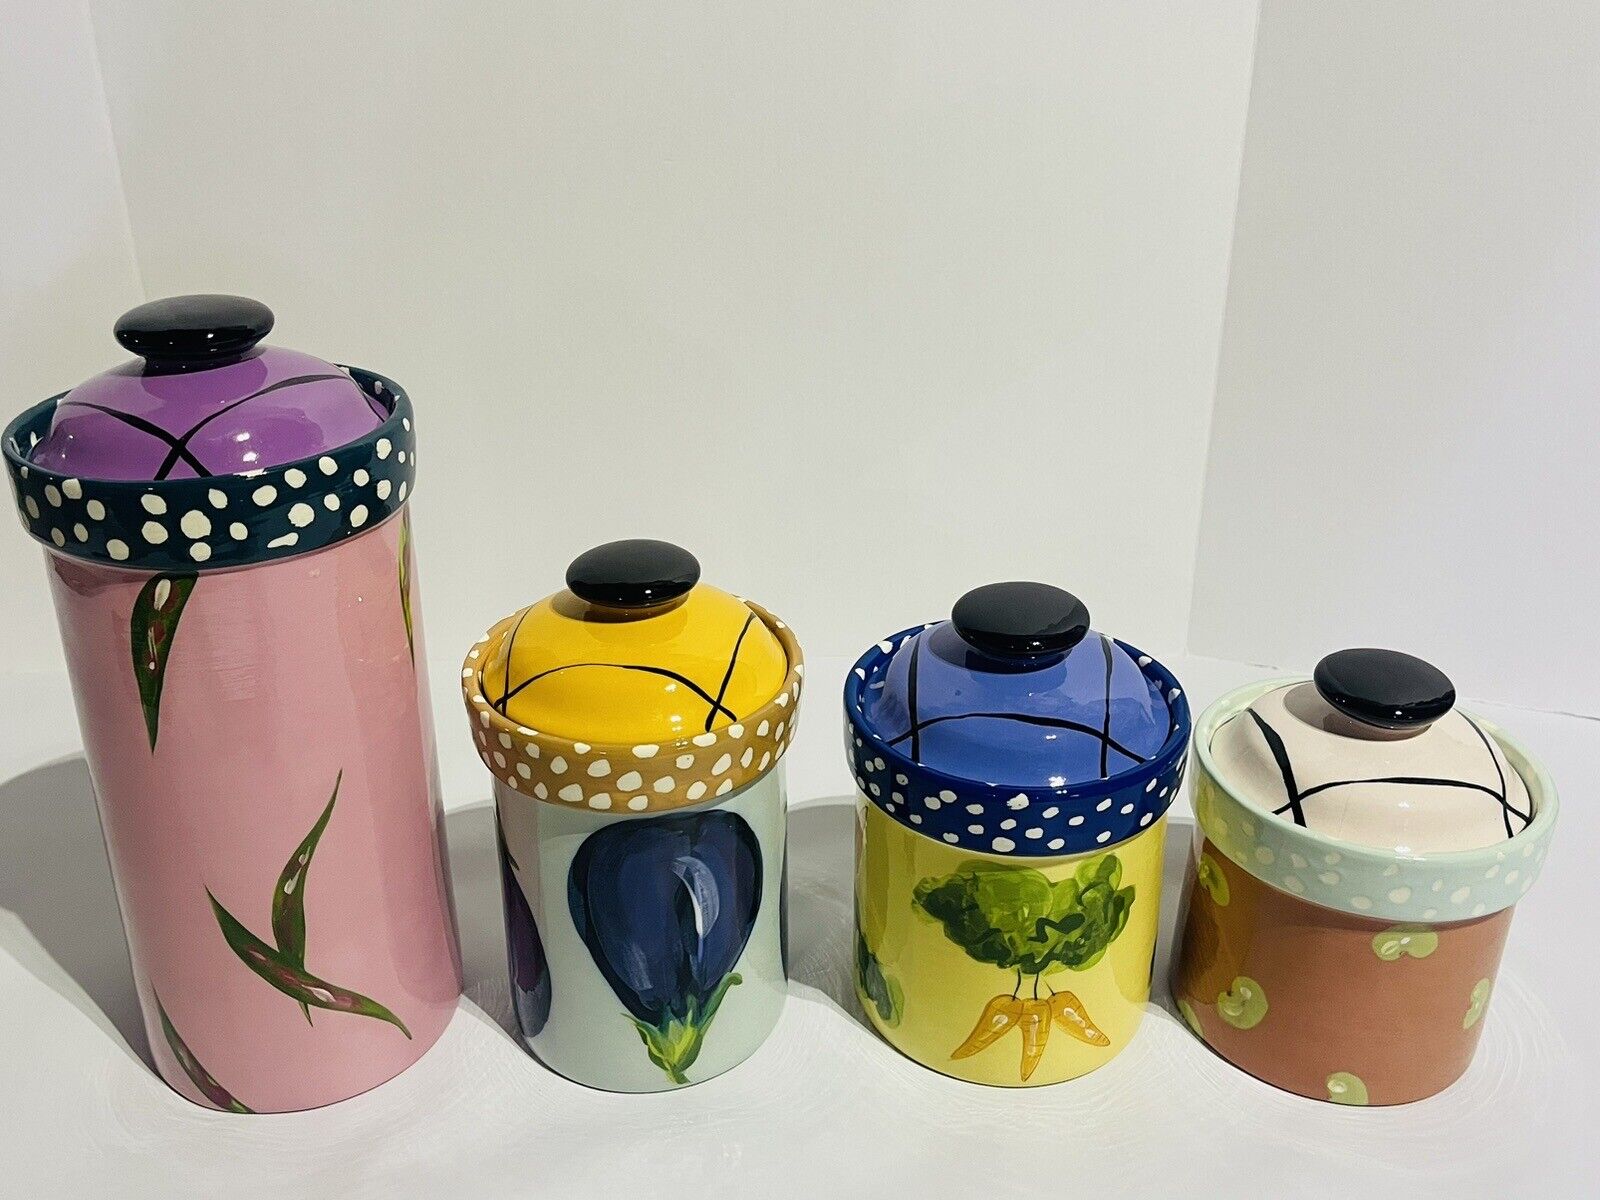 Droll Designs Vegetable w/Polka Dots Kitchen Storage Canisters Ceramic Set of 4